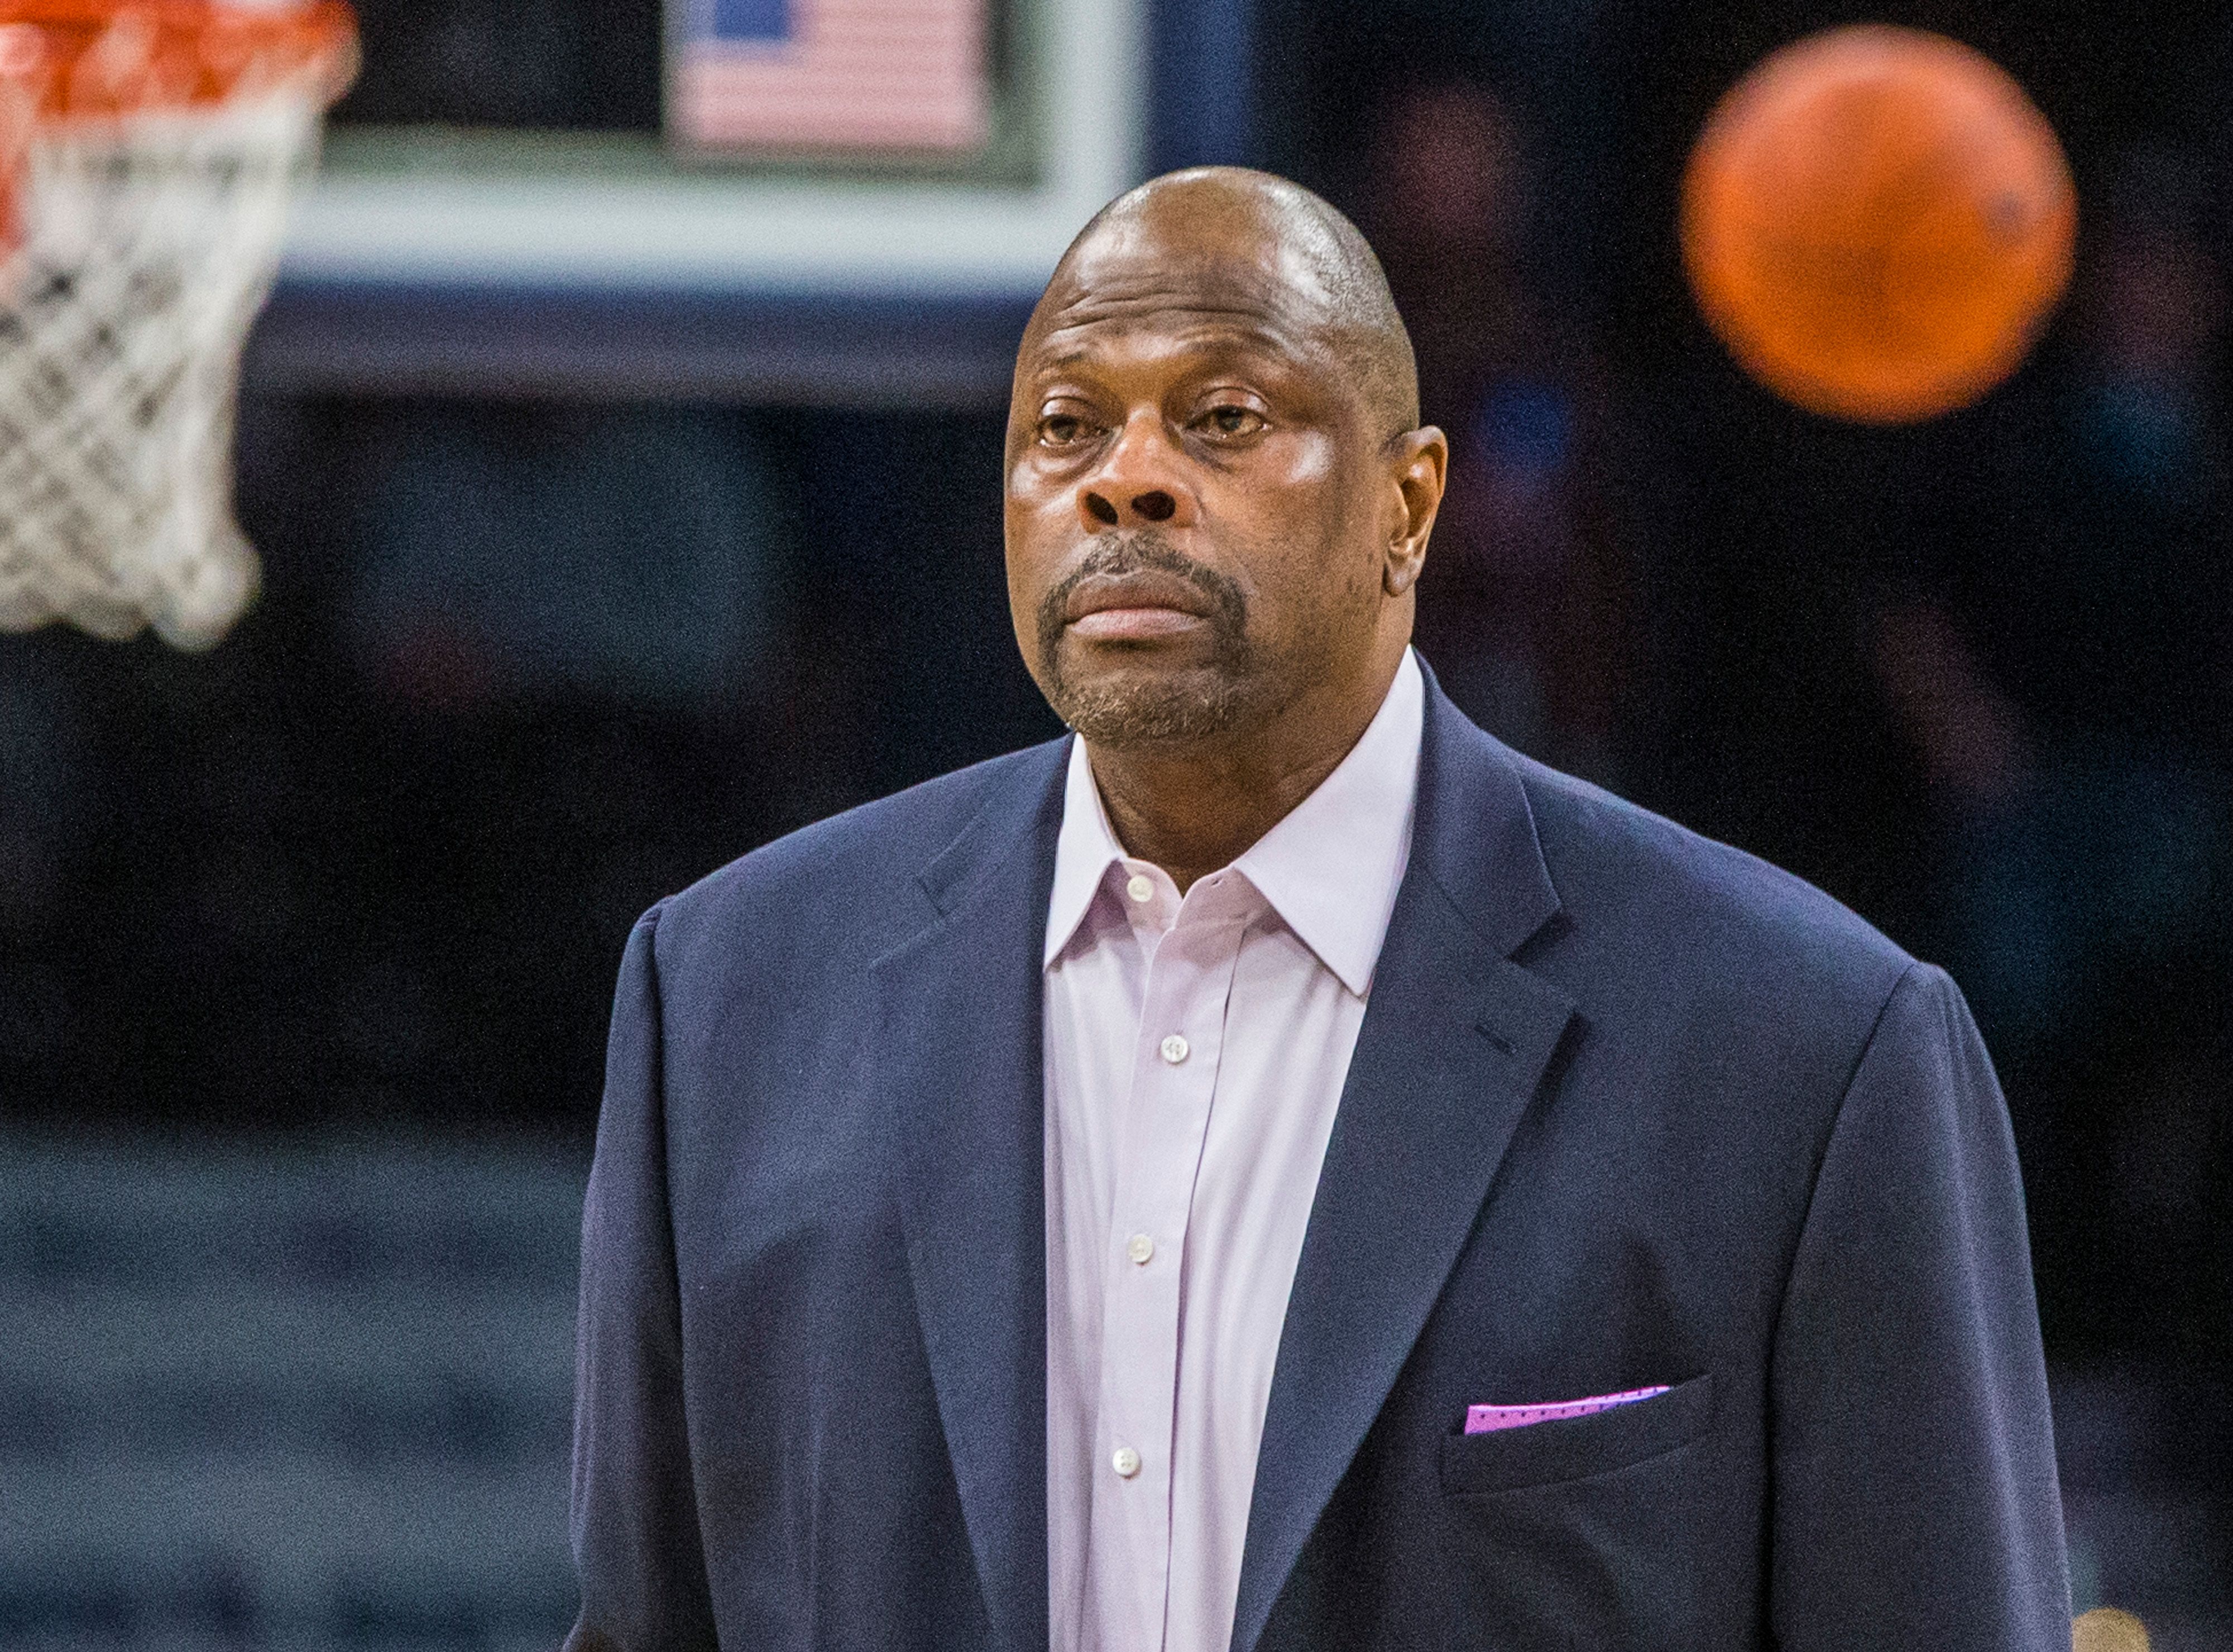 Patrick Ewing during a game between Butler and Georgetown at Capital One Arena on January 28, 2020 in Washington, DC. | Photo: Getty Images